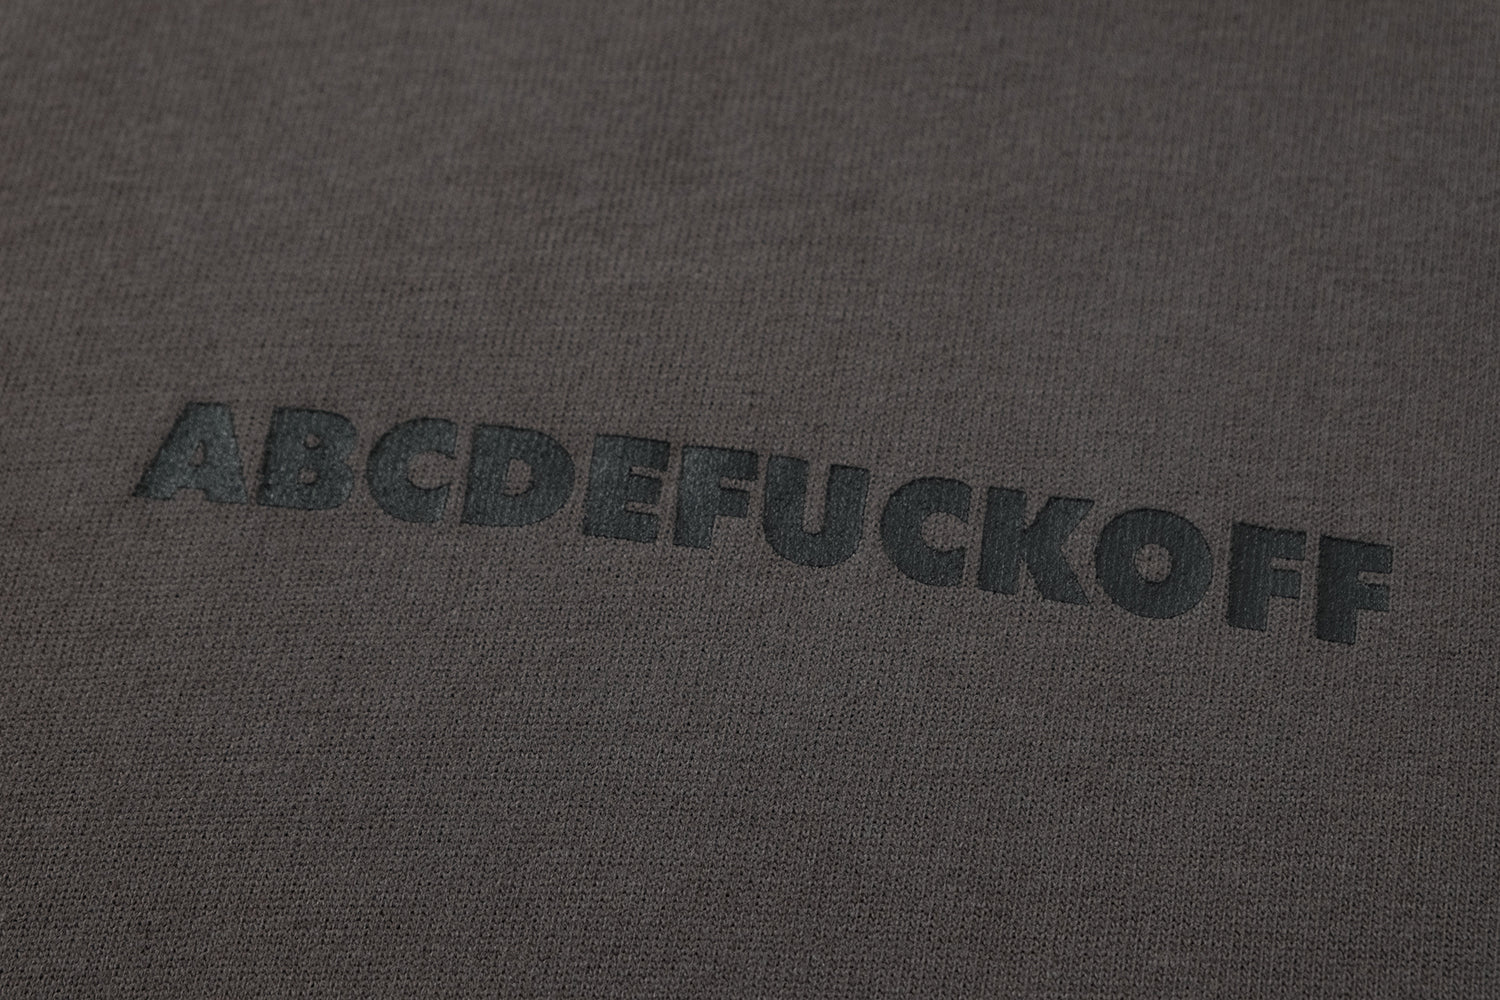 NW213DG | ABCDEFUCKOFF LONG TEE | NOT WORKING IV